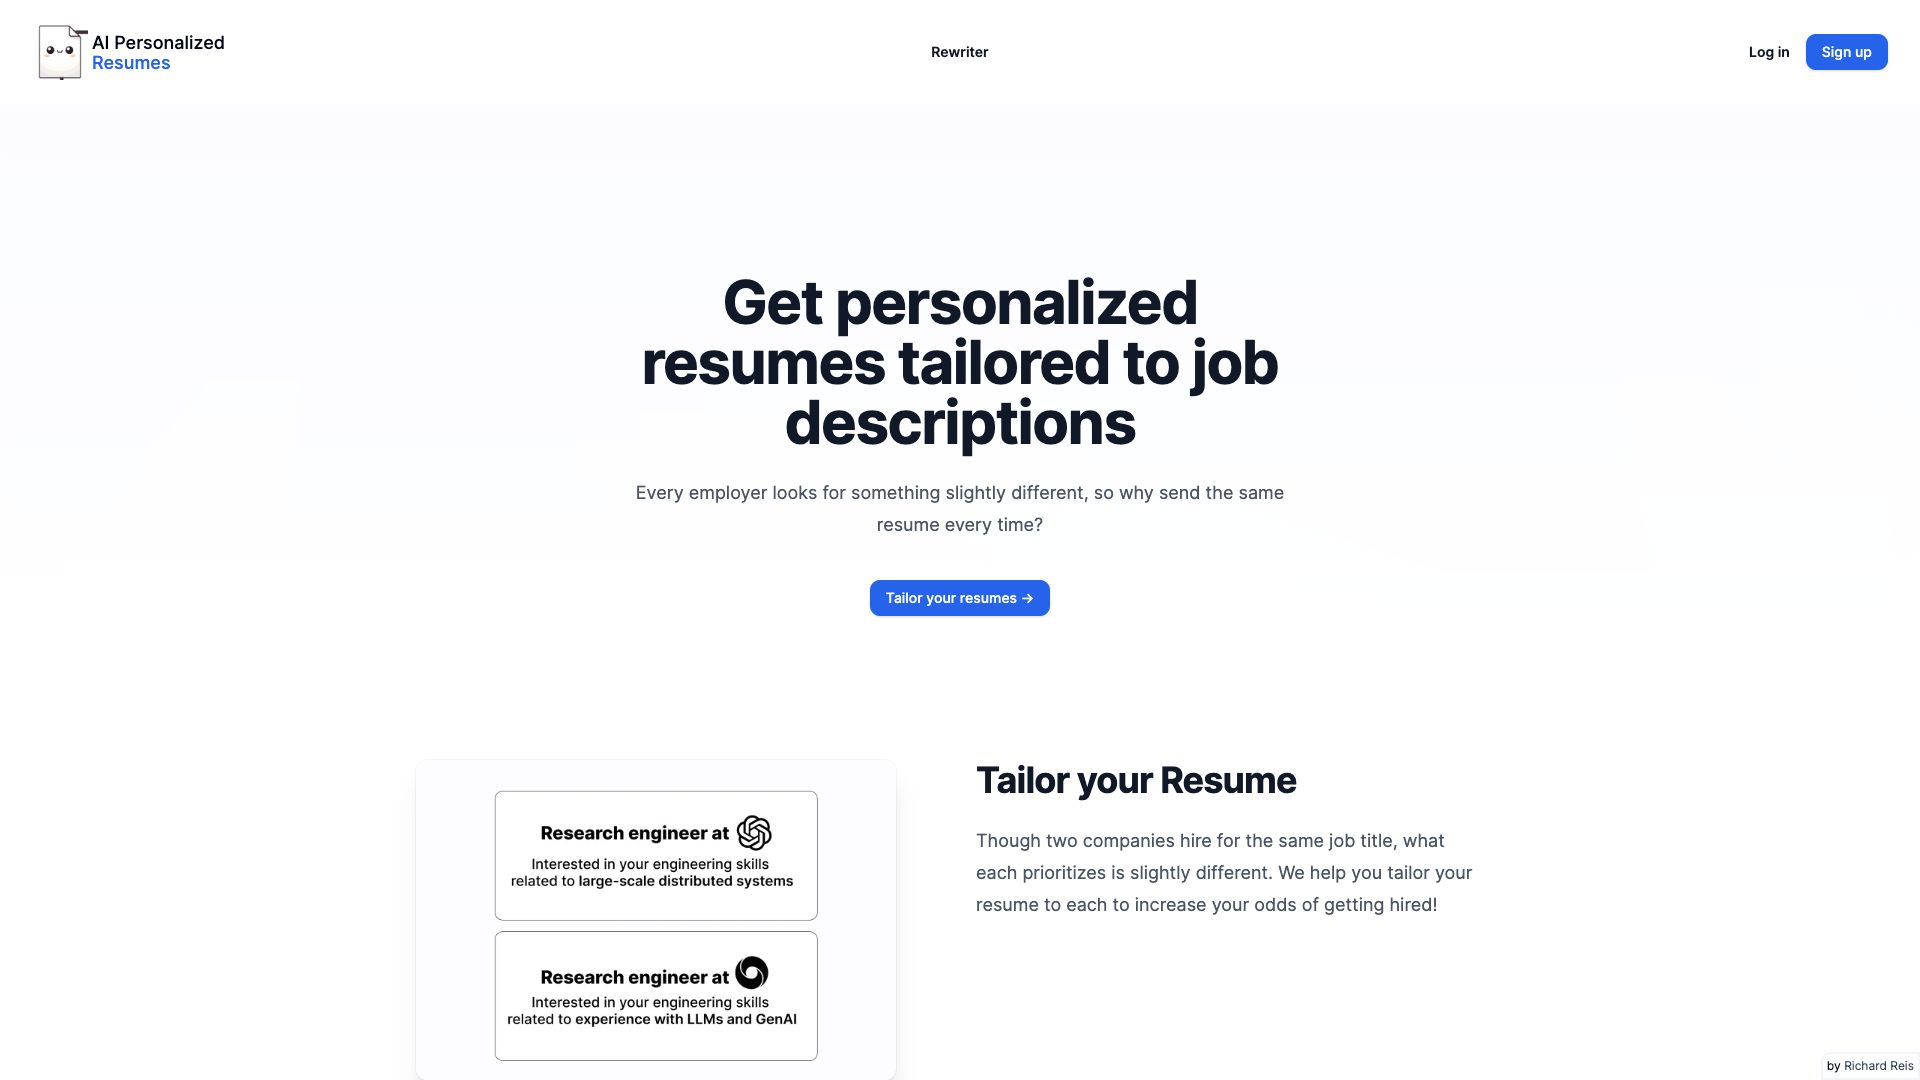 AI Personalized Resumes 
